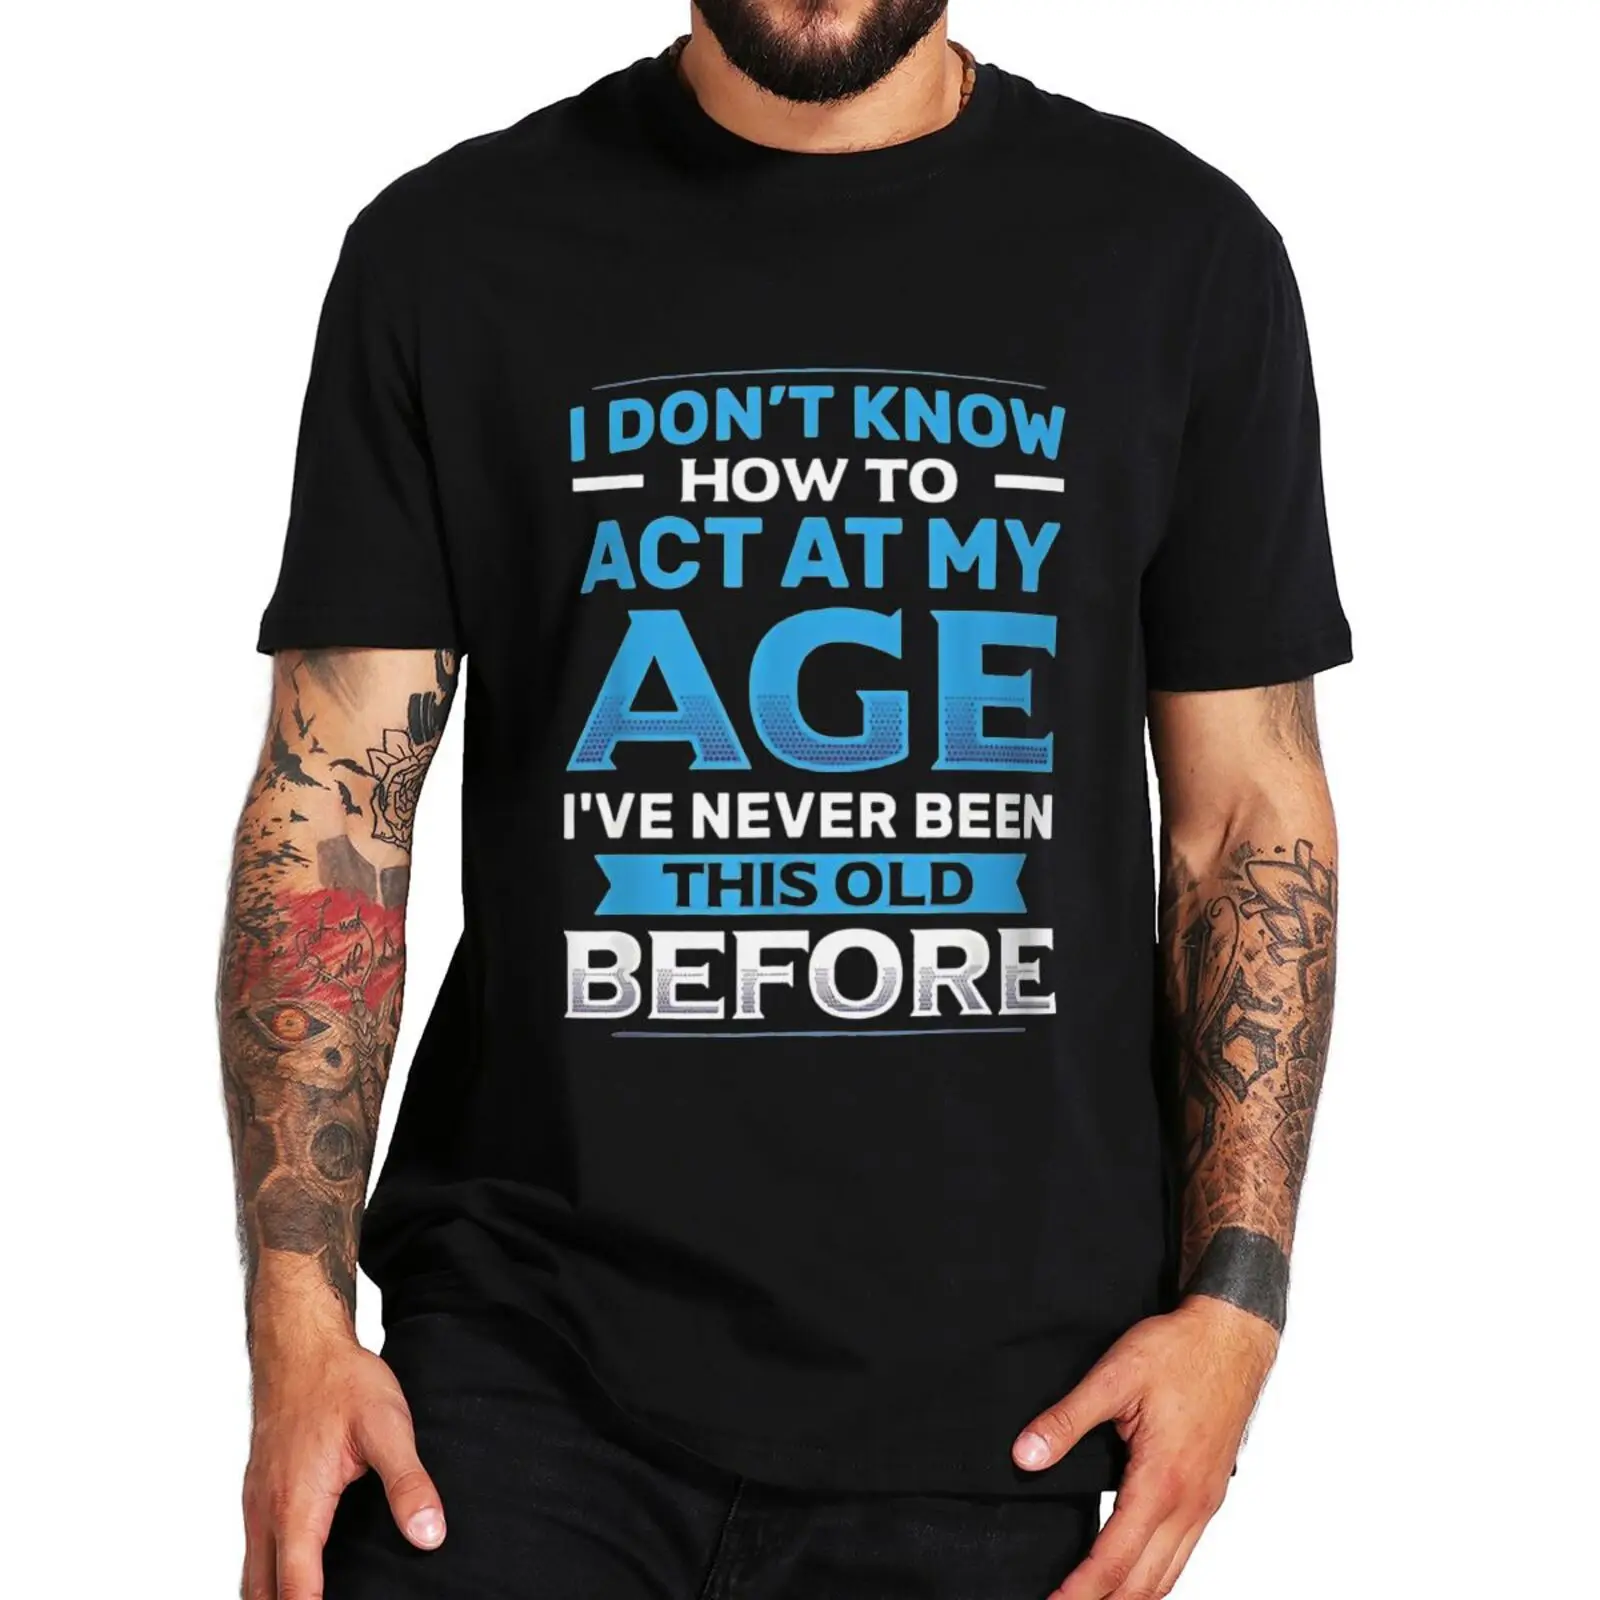 

I Dont Know How to Act My Age I've Never Been This Old Before T Shirt Funny Humor Joke Tops Cotton Unisex Casual T-shirts